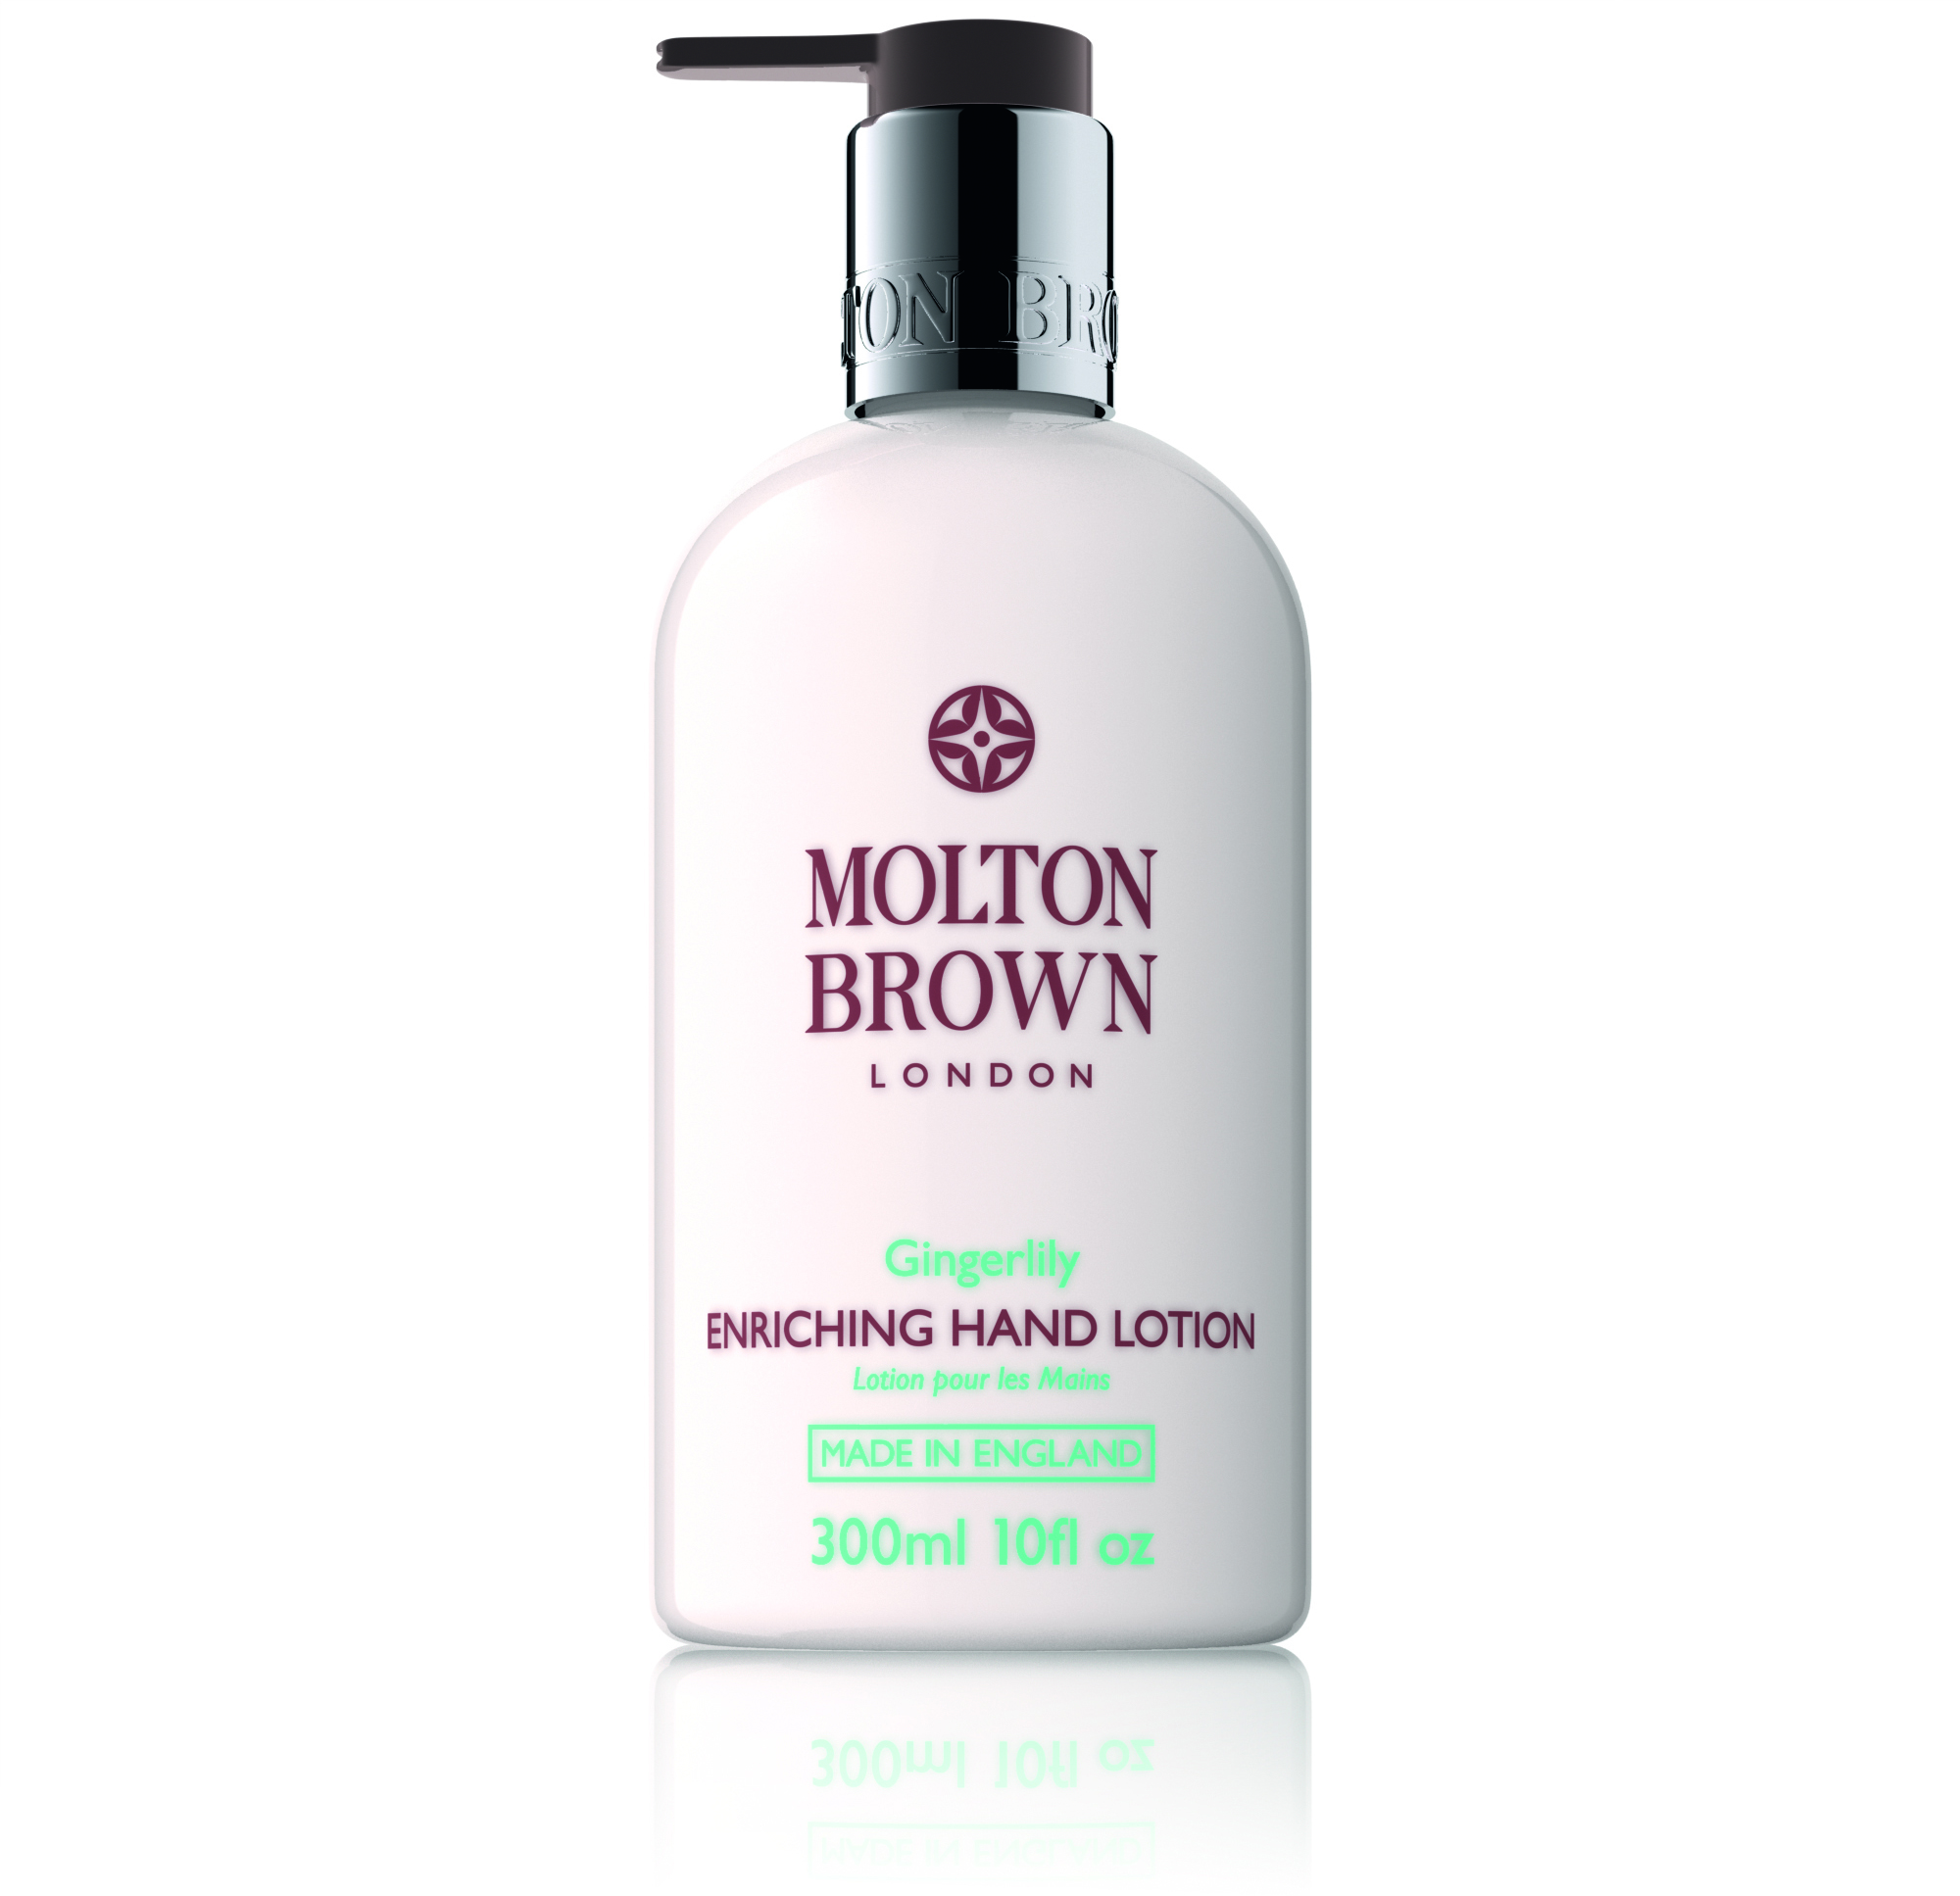 Molton Brown Gingerlilly Hand Lotion